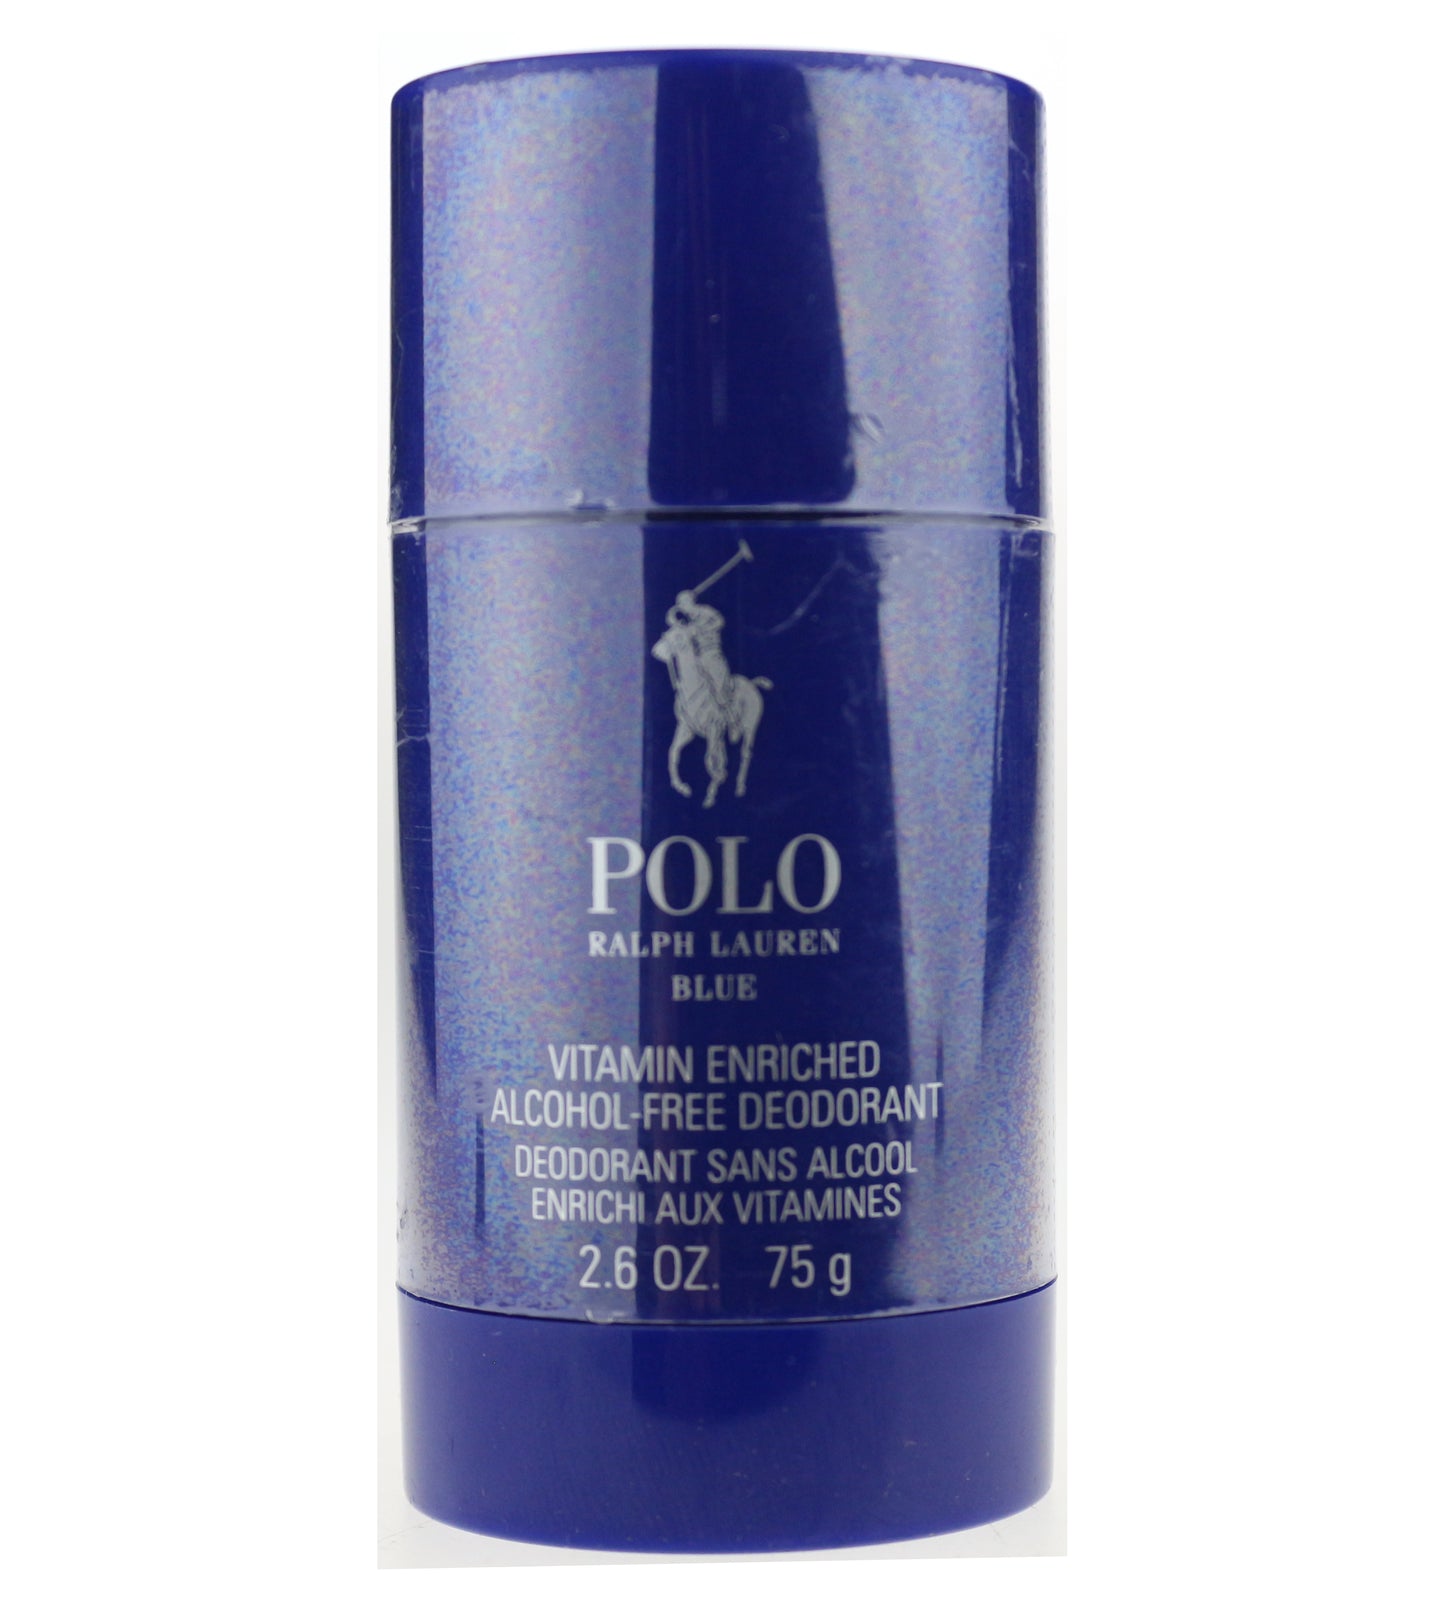 Polo Vitamin Enriched Alcohol-Free Deodorant 75 g